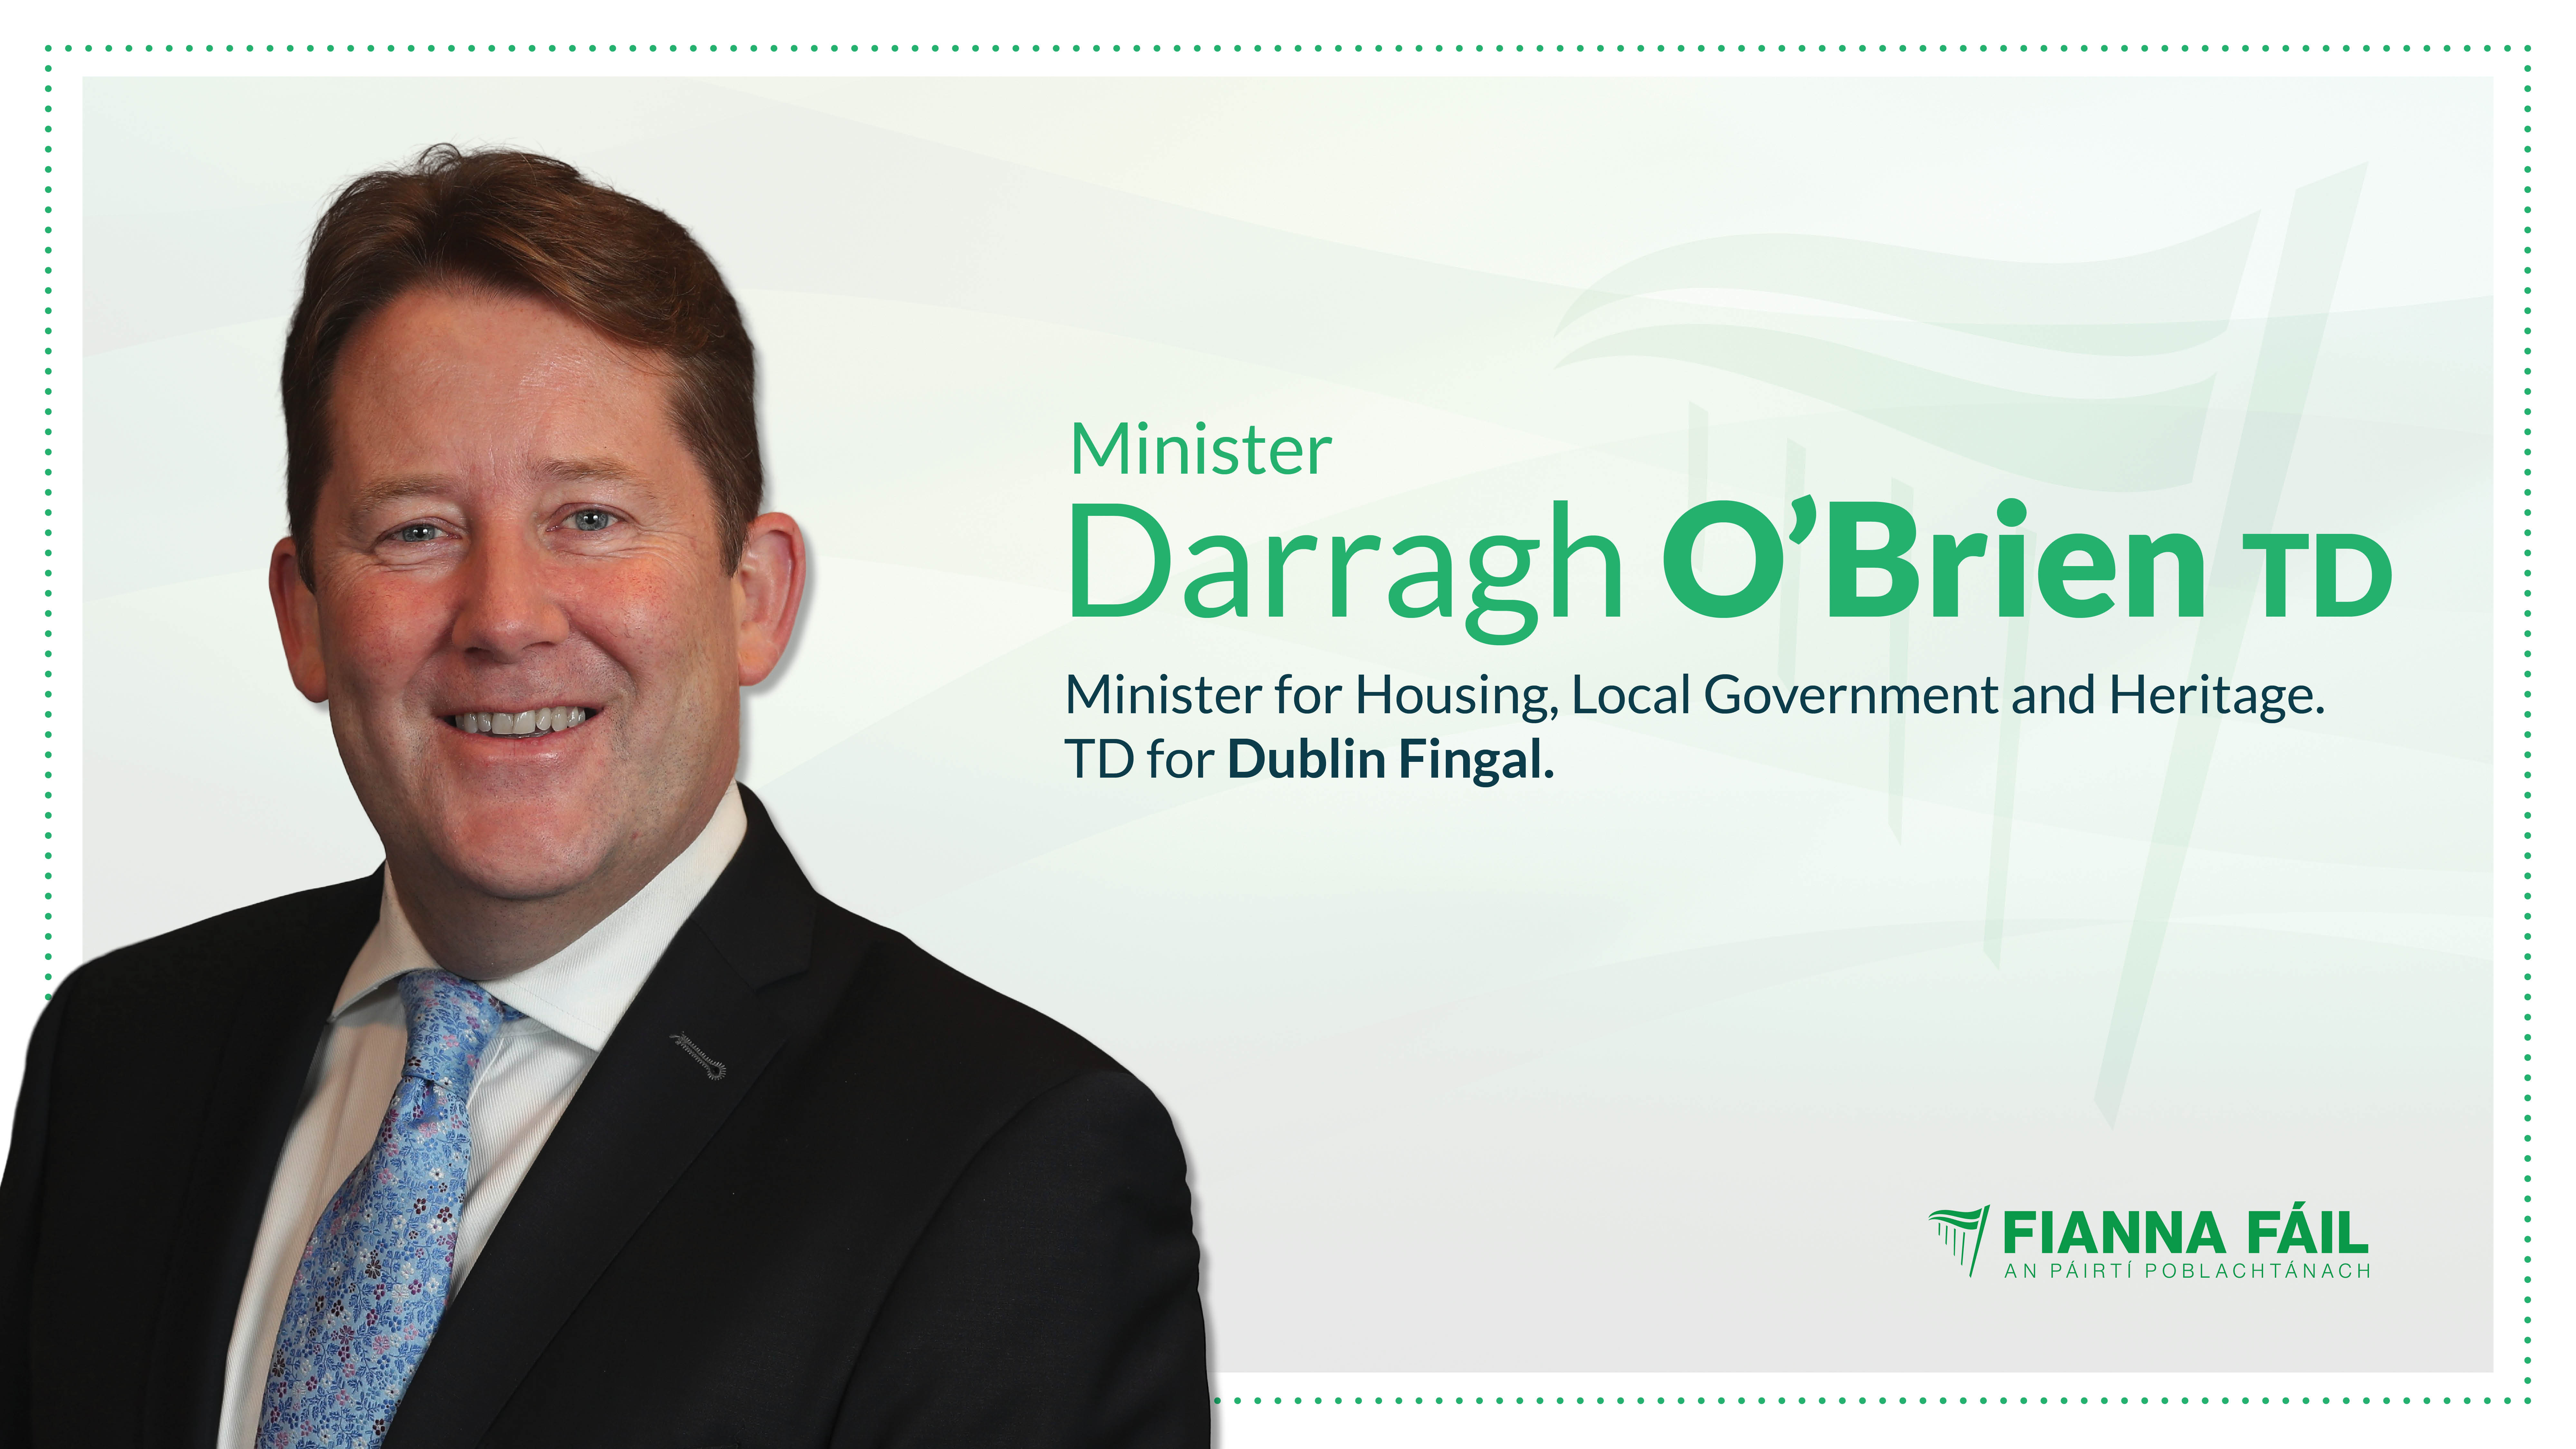 Minister O’Brien welcomes the report of the working group examining defects in purpose-built apartments and duplexes constructed between 1991 and 2013